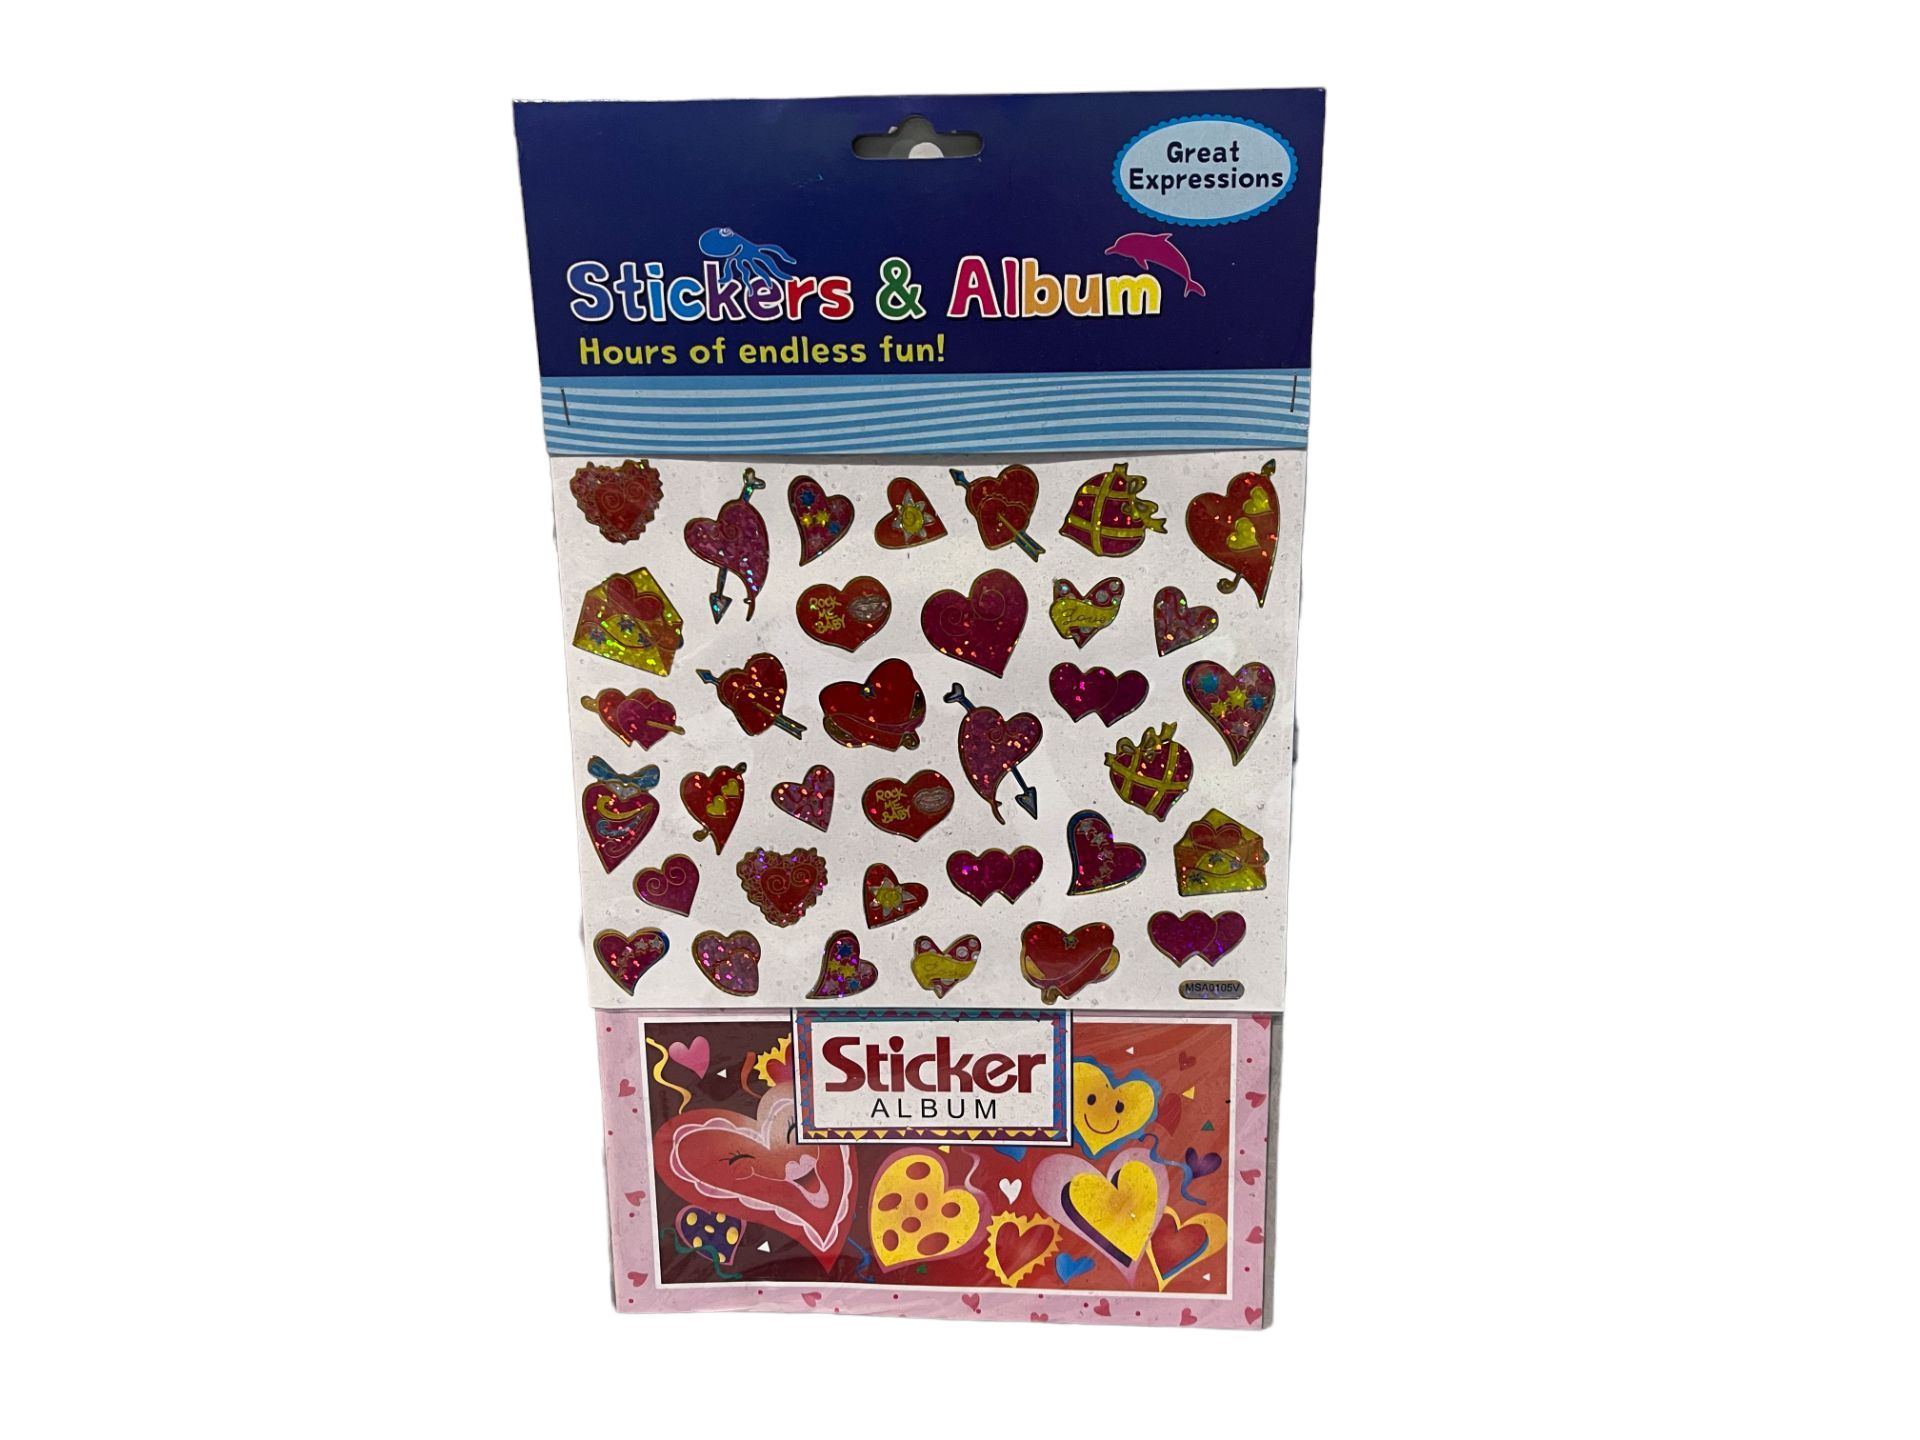 24 x Great Expressions Packs of Stickers and Album